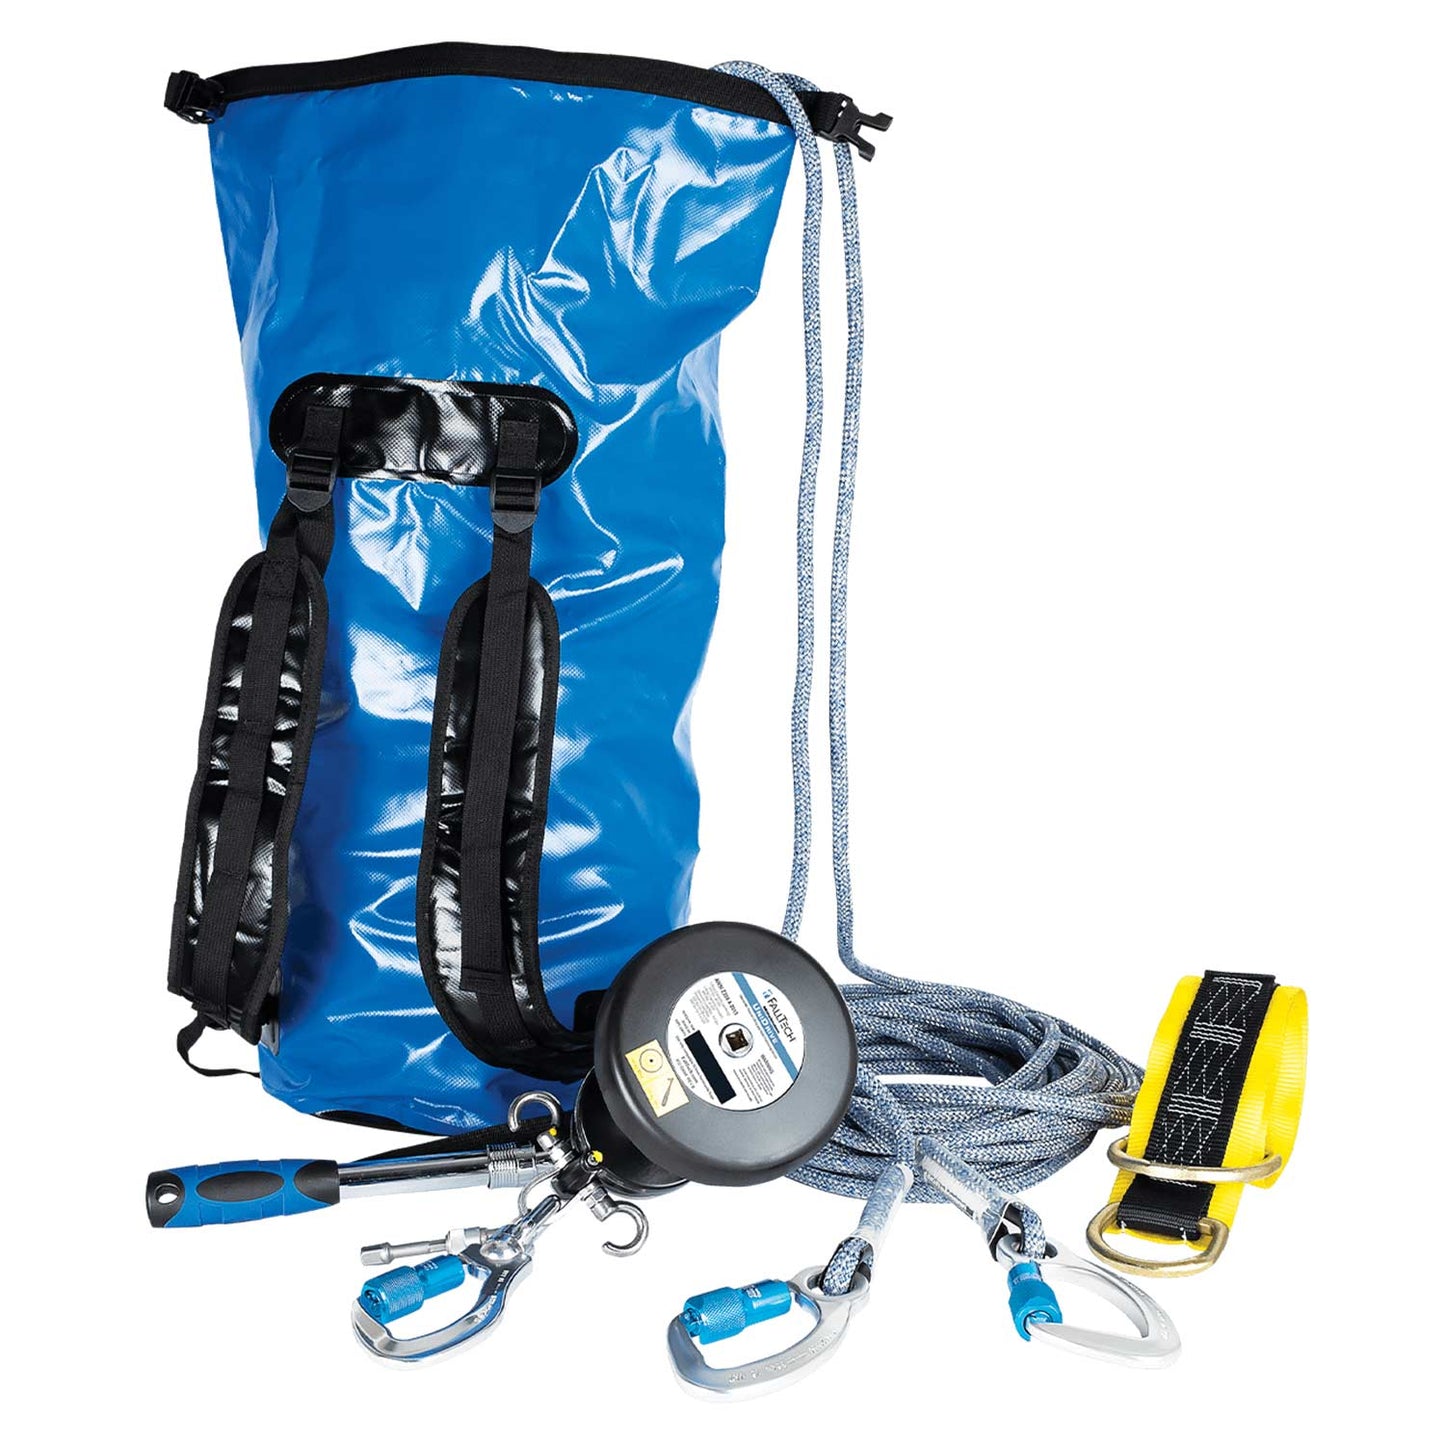 FallTech 300' Fall Protection Rescue Equipment Kit with Bag | 6814300K